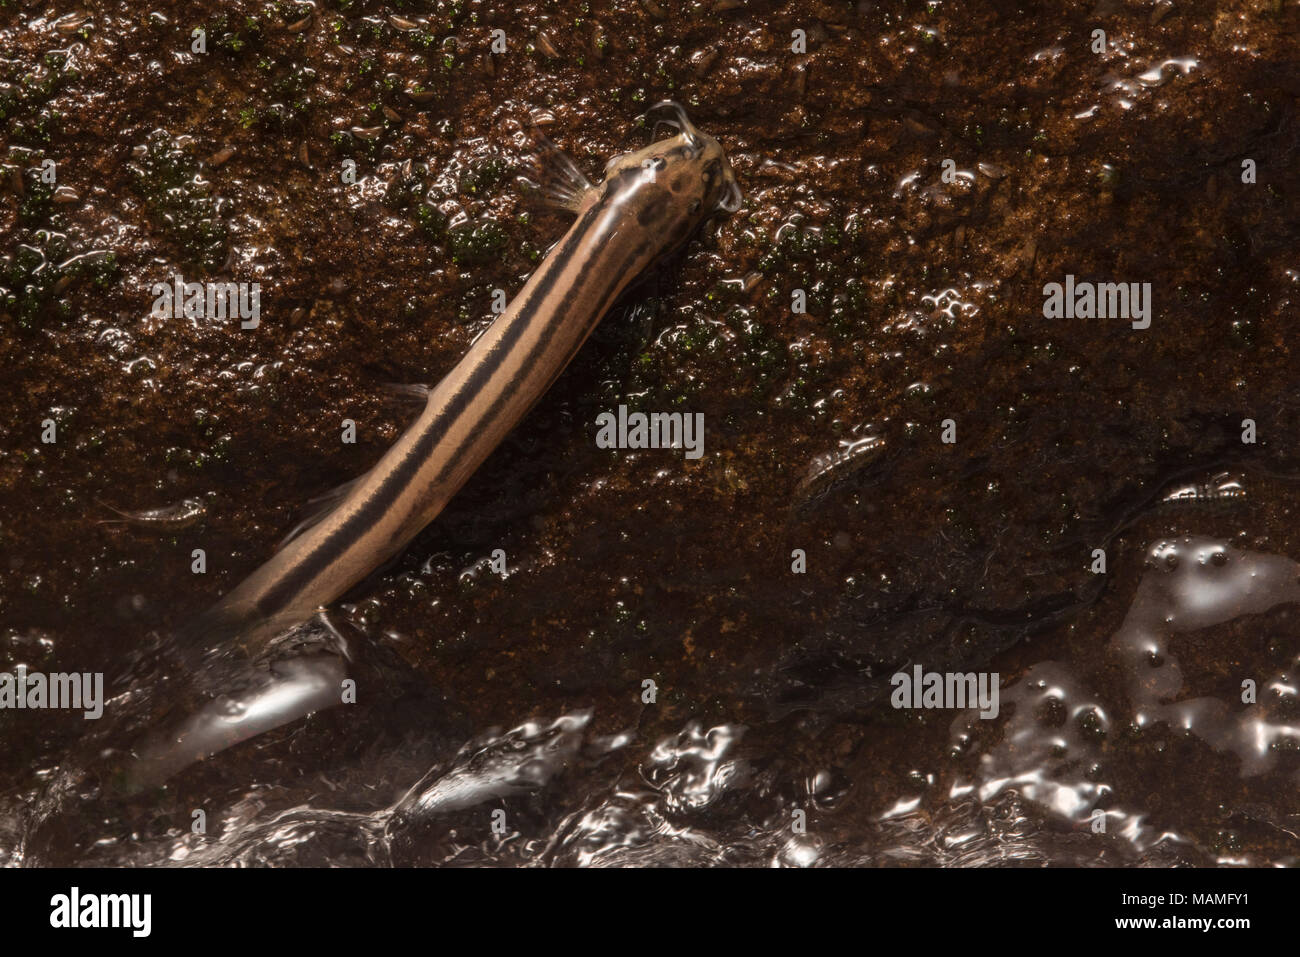 A pencil catfish in the genus Trichomycterus leaves the water. It can be seen clinging to rocks next to river rapids while searching for food. Stock Photo